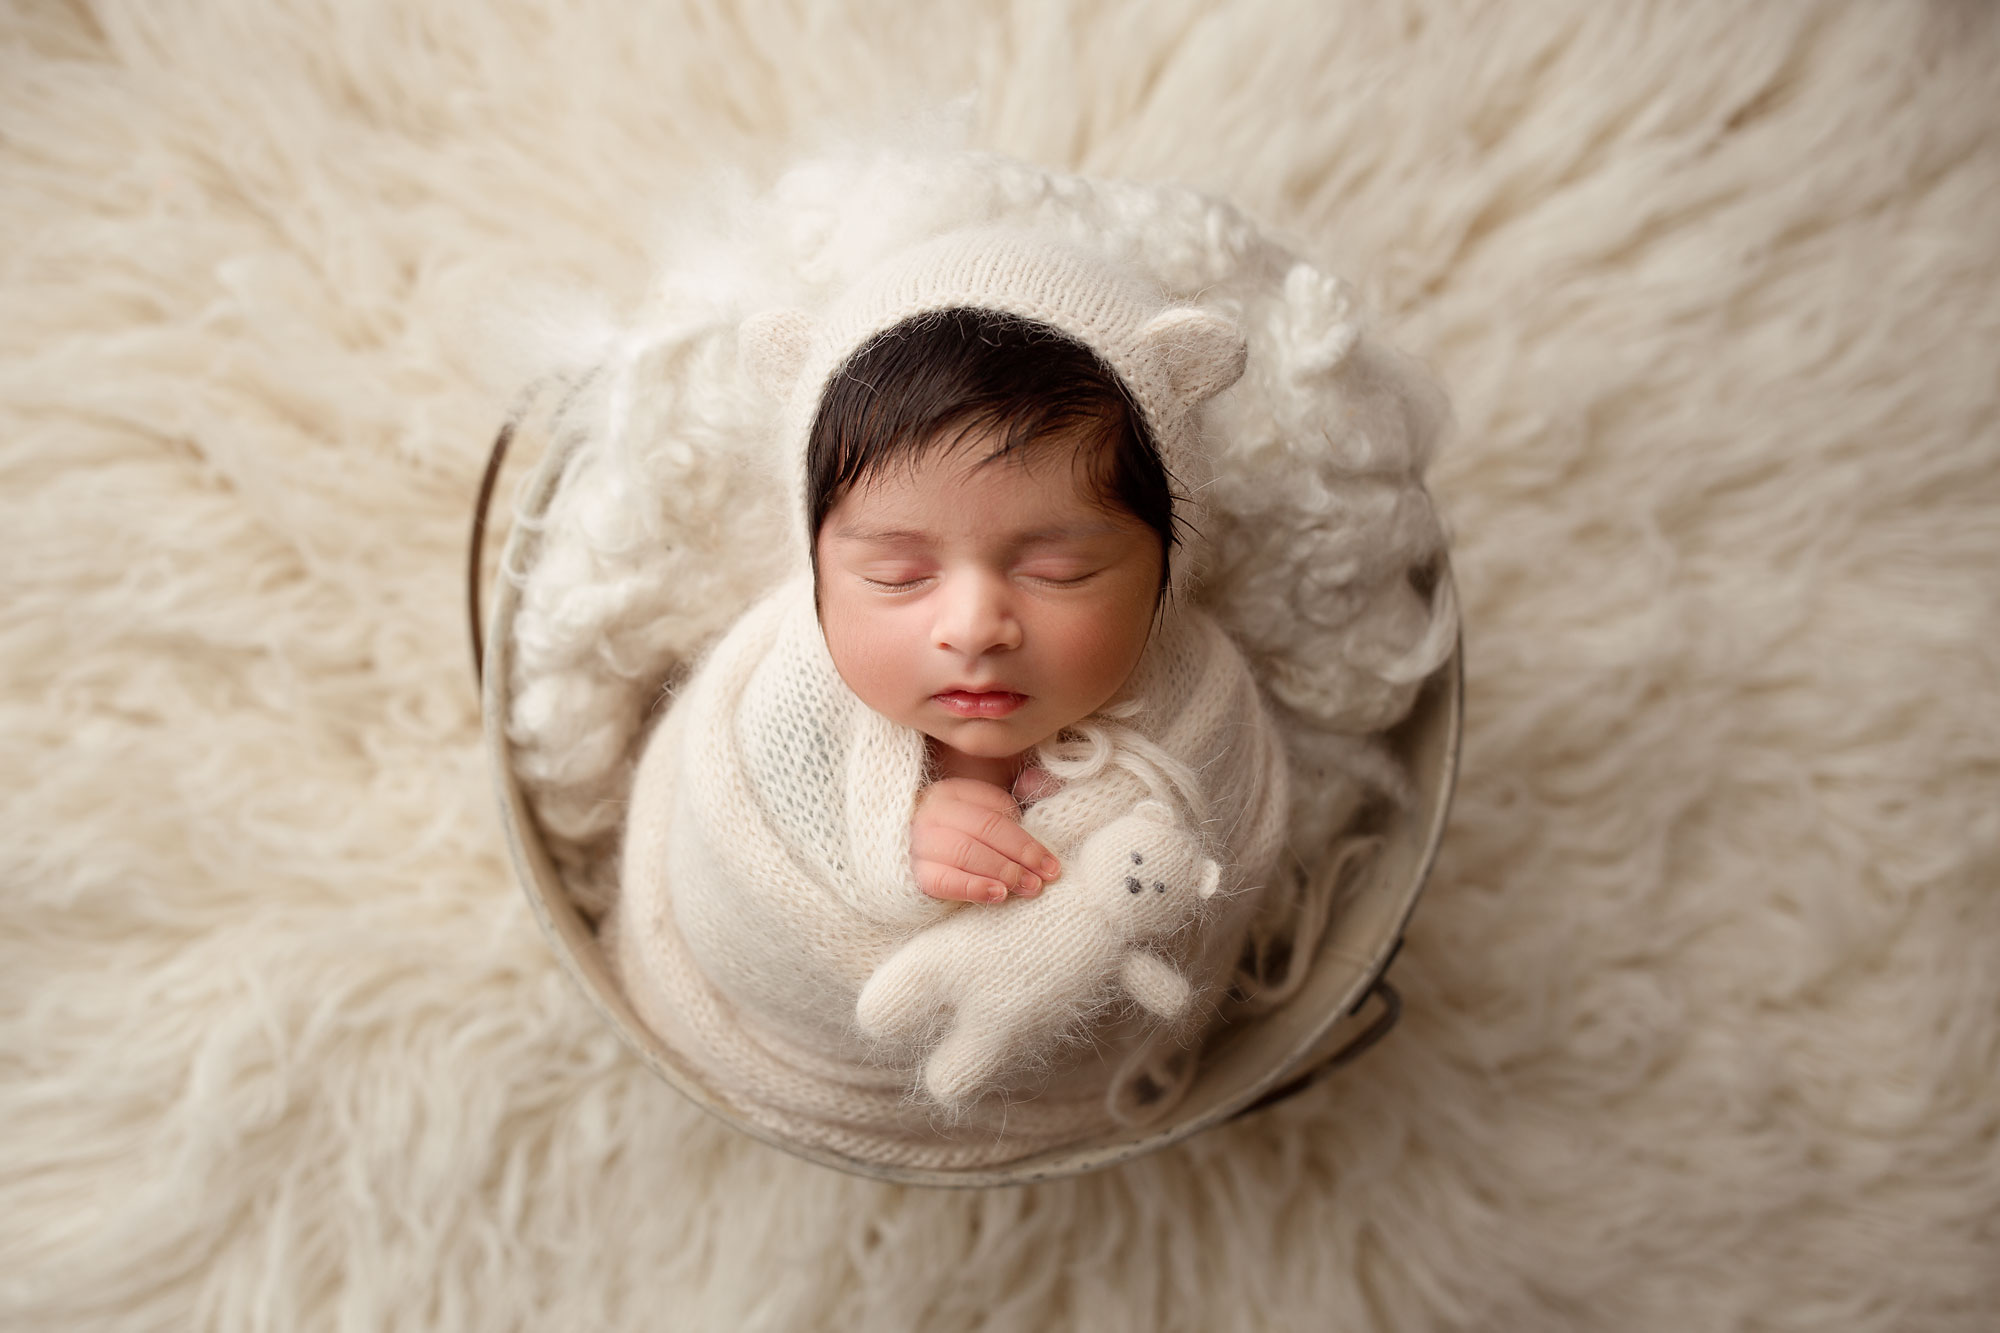 baby boy sleeping on a blanket NJ newborn photography What is the best age for newborn photos